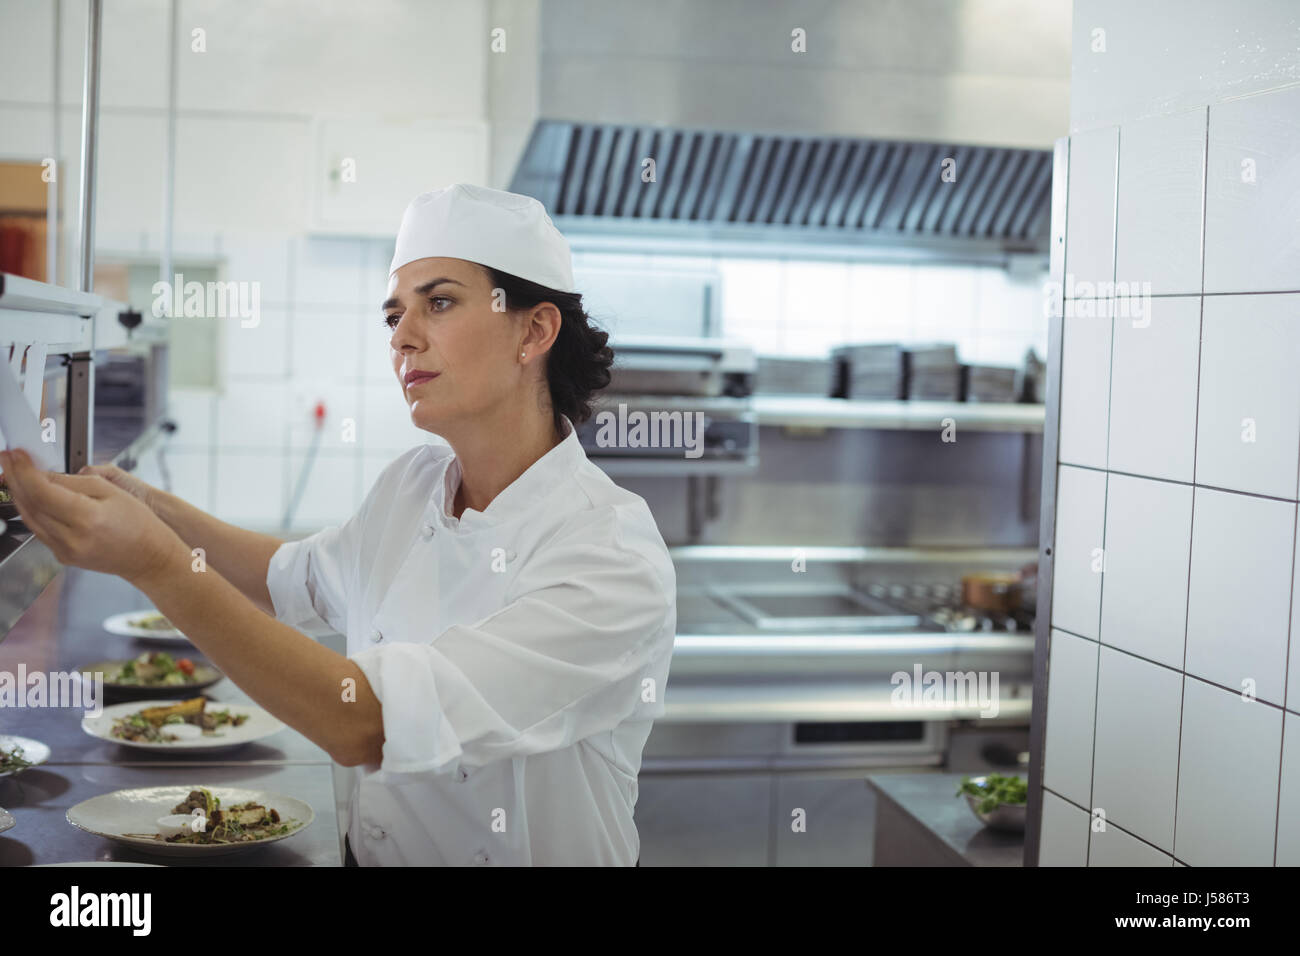 Female Chef Looking At An Order List In The Commercial Kitchen At J586T3 